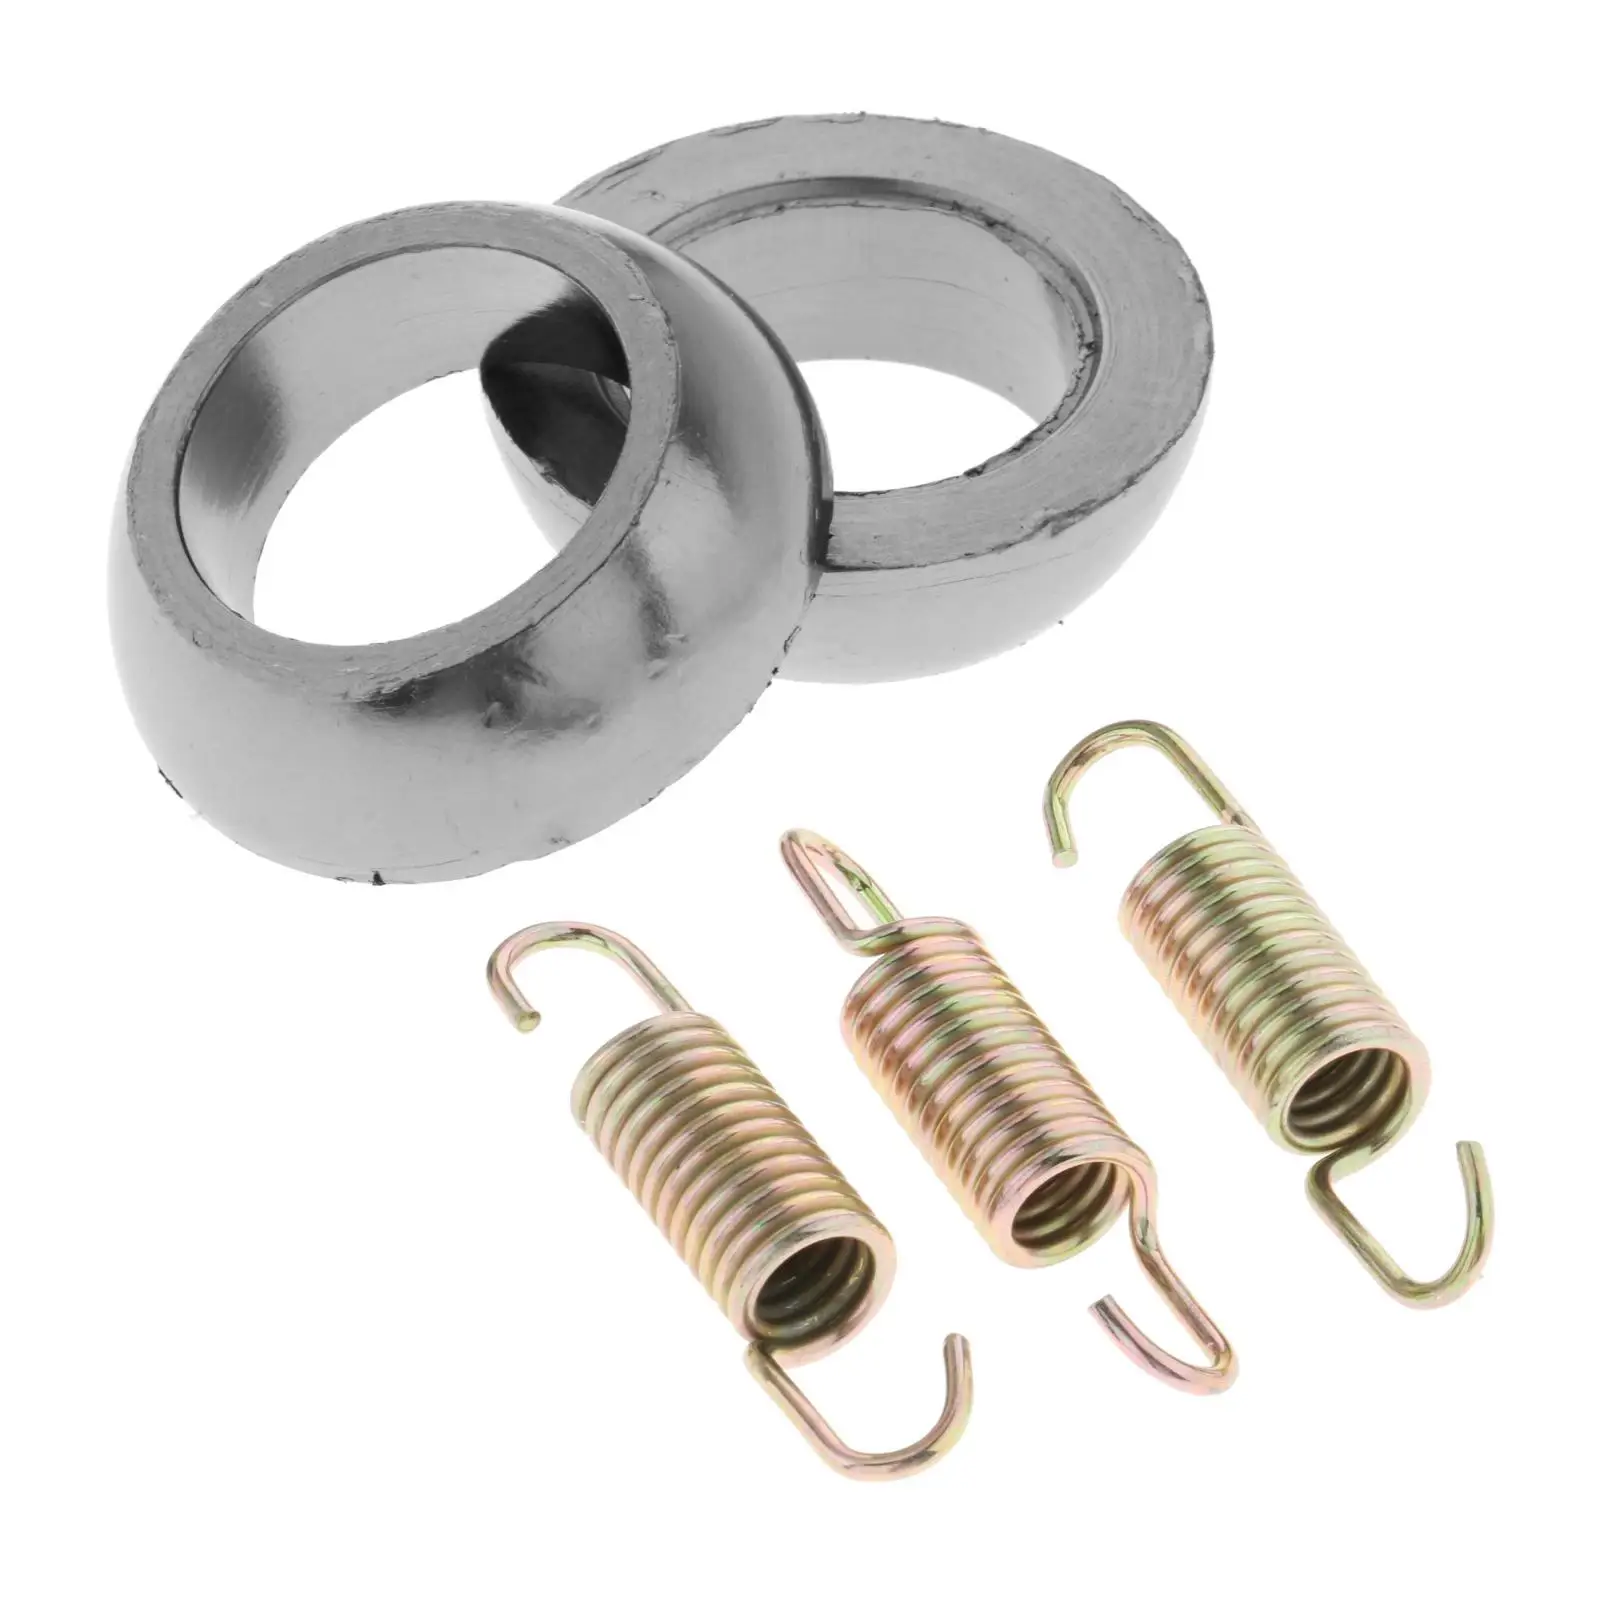  Exhaust Gasket & Spring Kit Accessories Fit for Arctic Cat 300 250